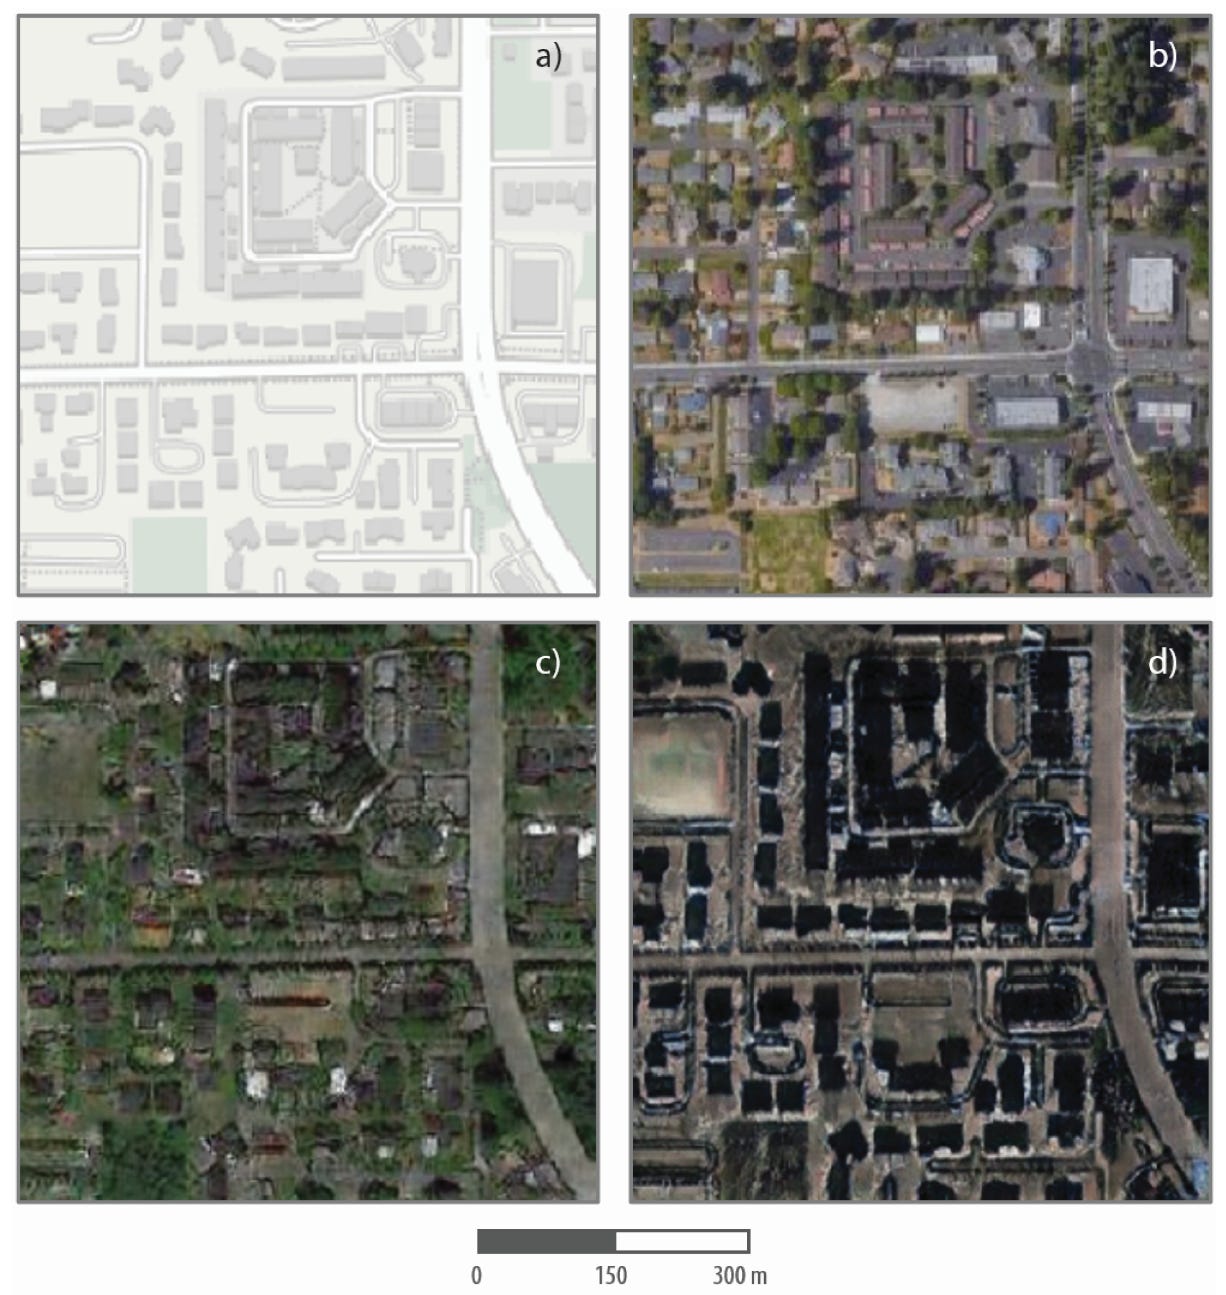 map illustration in top left; satellite photo of Tacoma top right; simulated photos of Tacoma using data from Seattle on the lower left and Beijing on the lower right